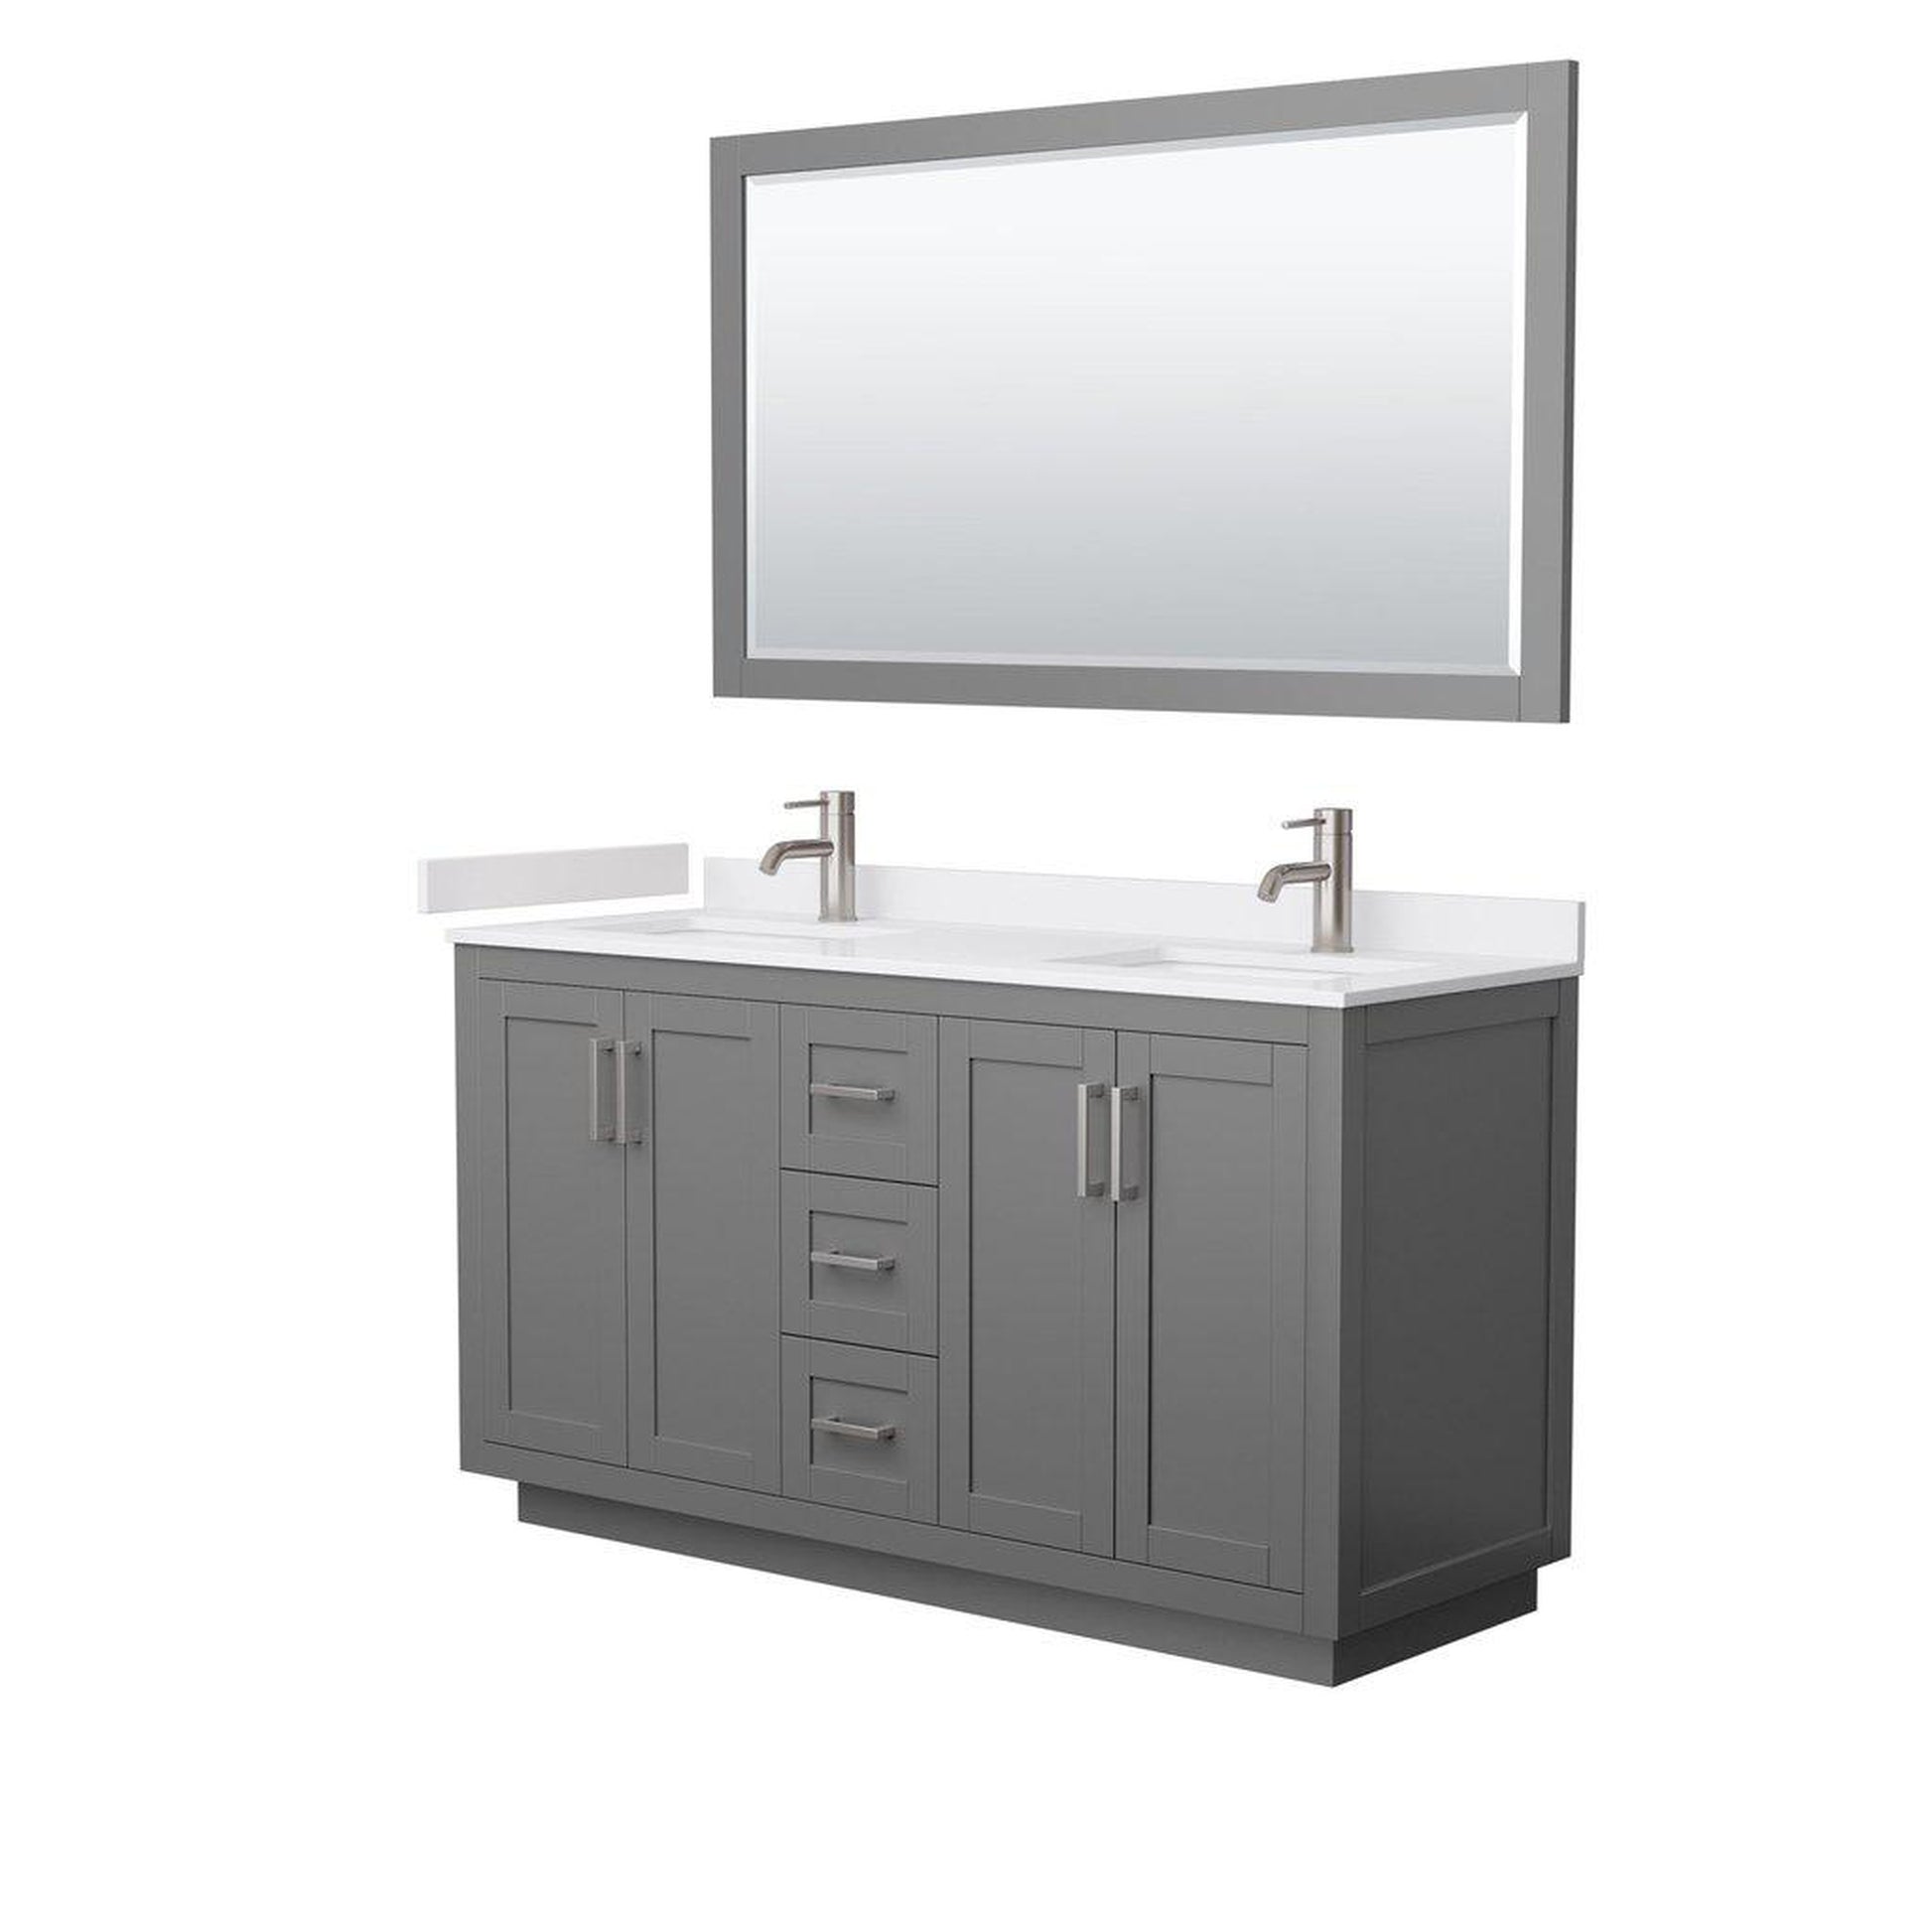 Wyndham Collection Miranda 60" Double Bathroom Dark Gray Vanity Set With White Cultured Marble Countertop, Undermount Square Sink, 58" Mirror And Brushed Nickel Trim